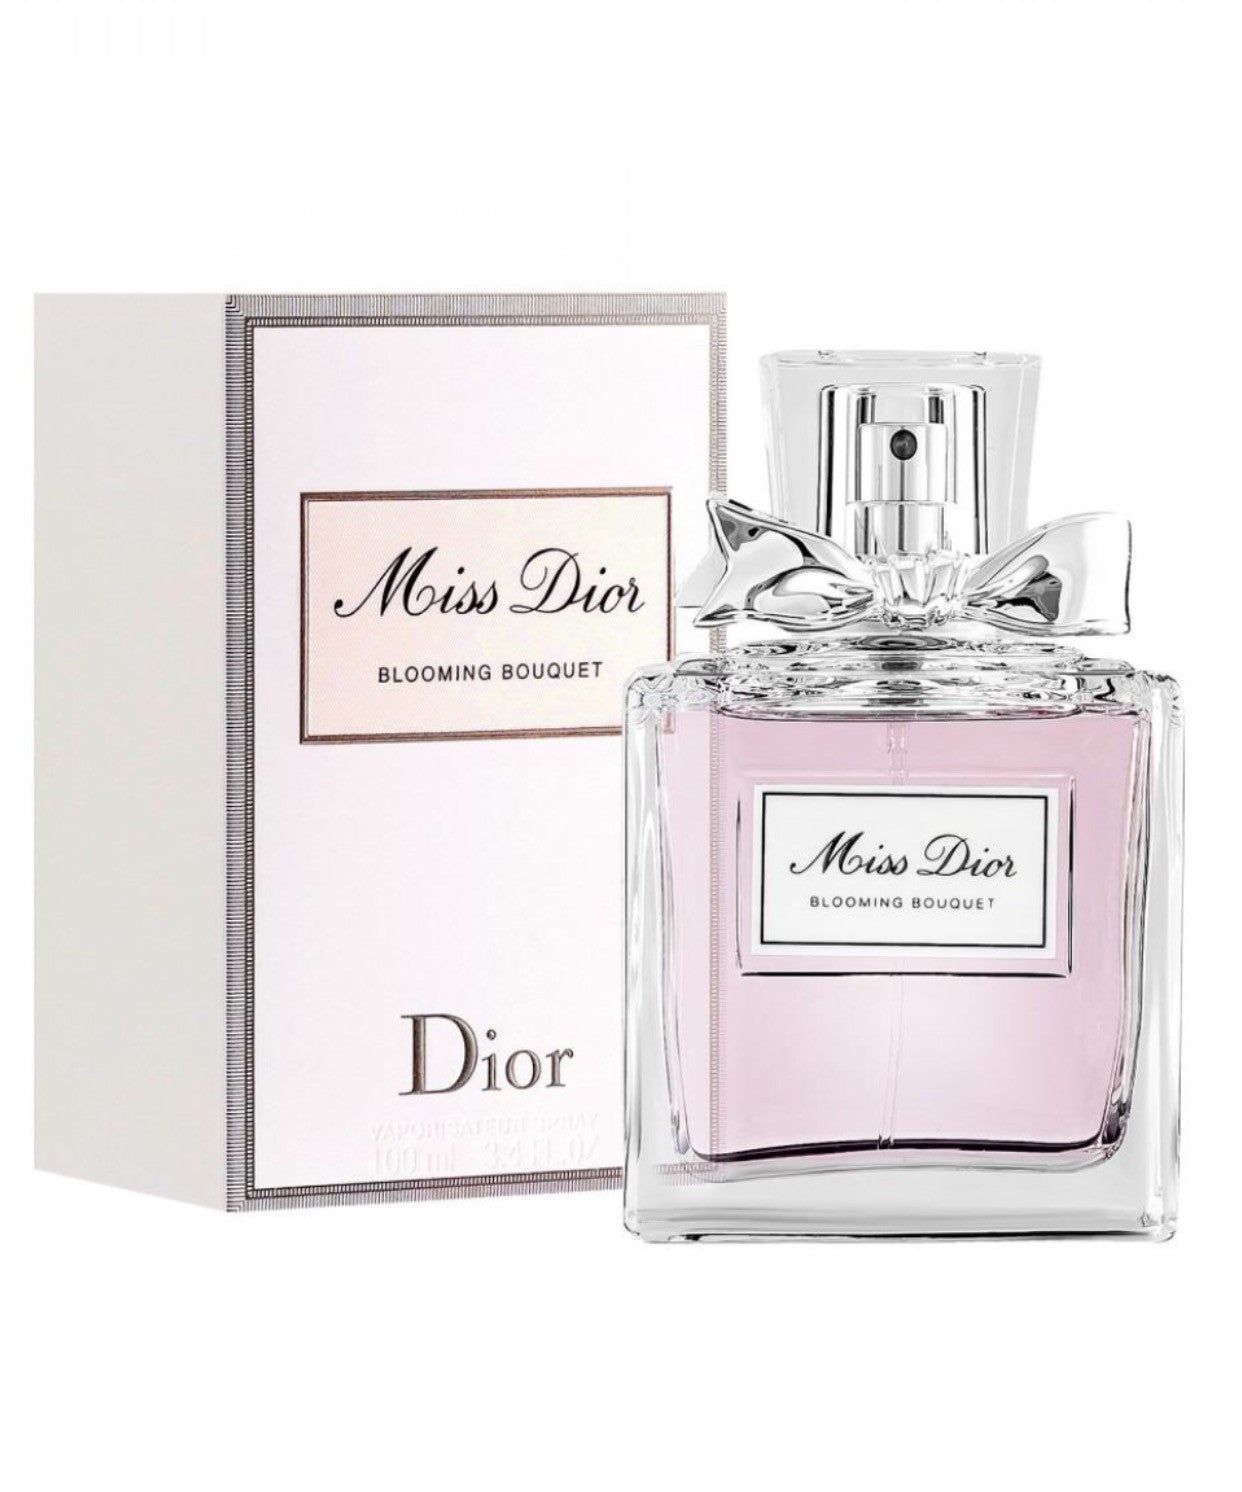 Miss Dior Blooming Bouquet 3.4 Oz EDT 